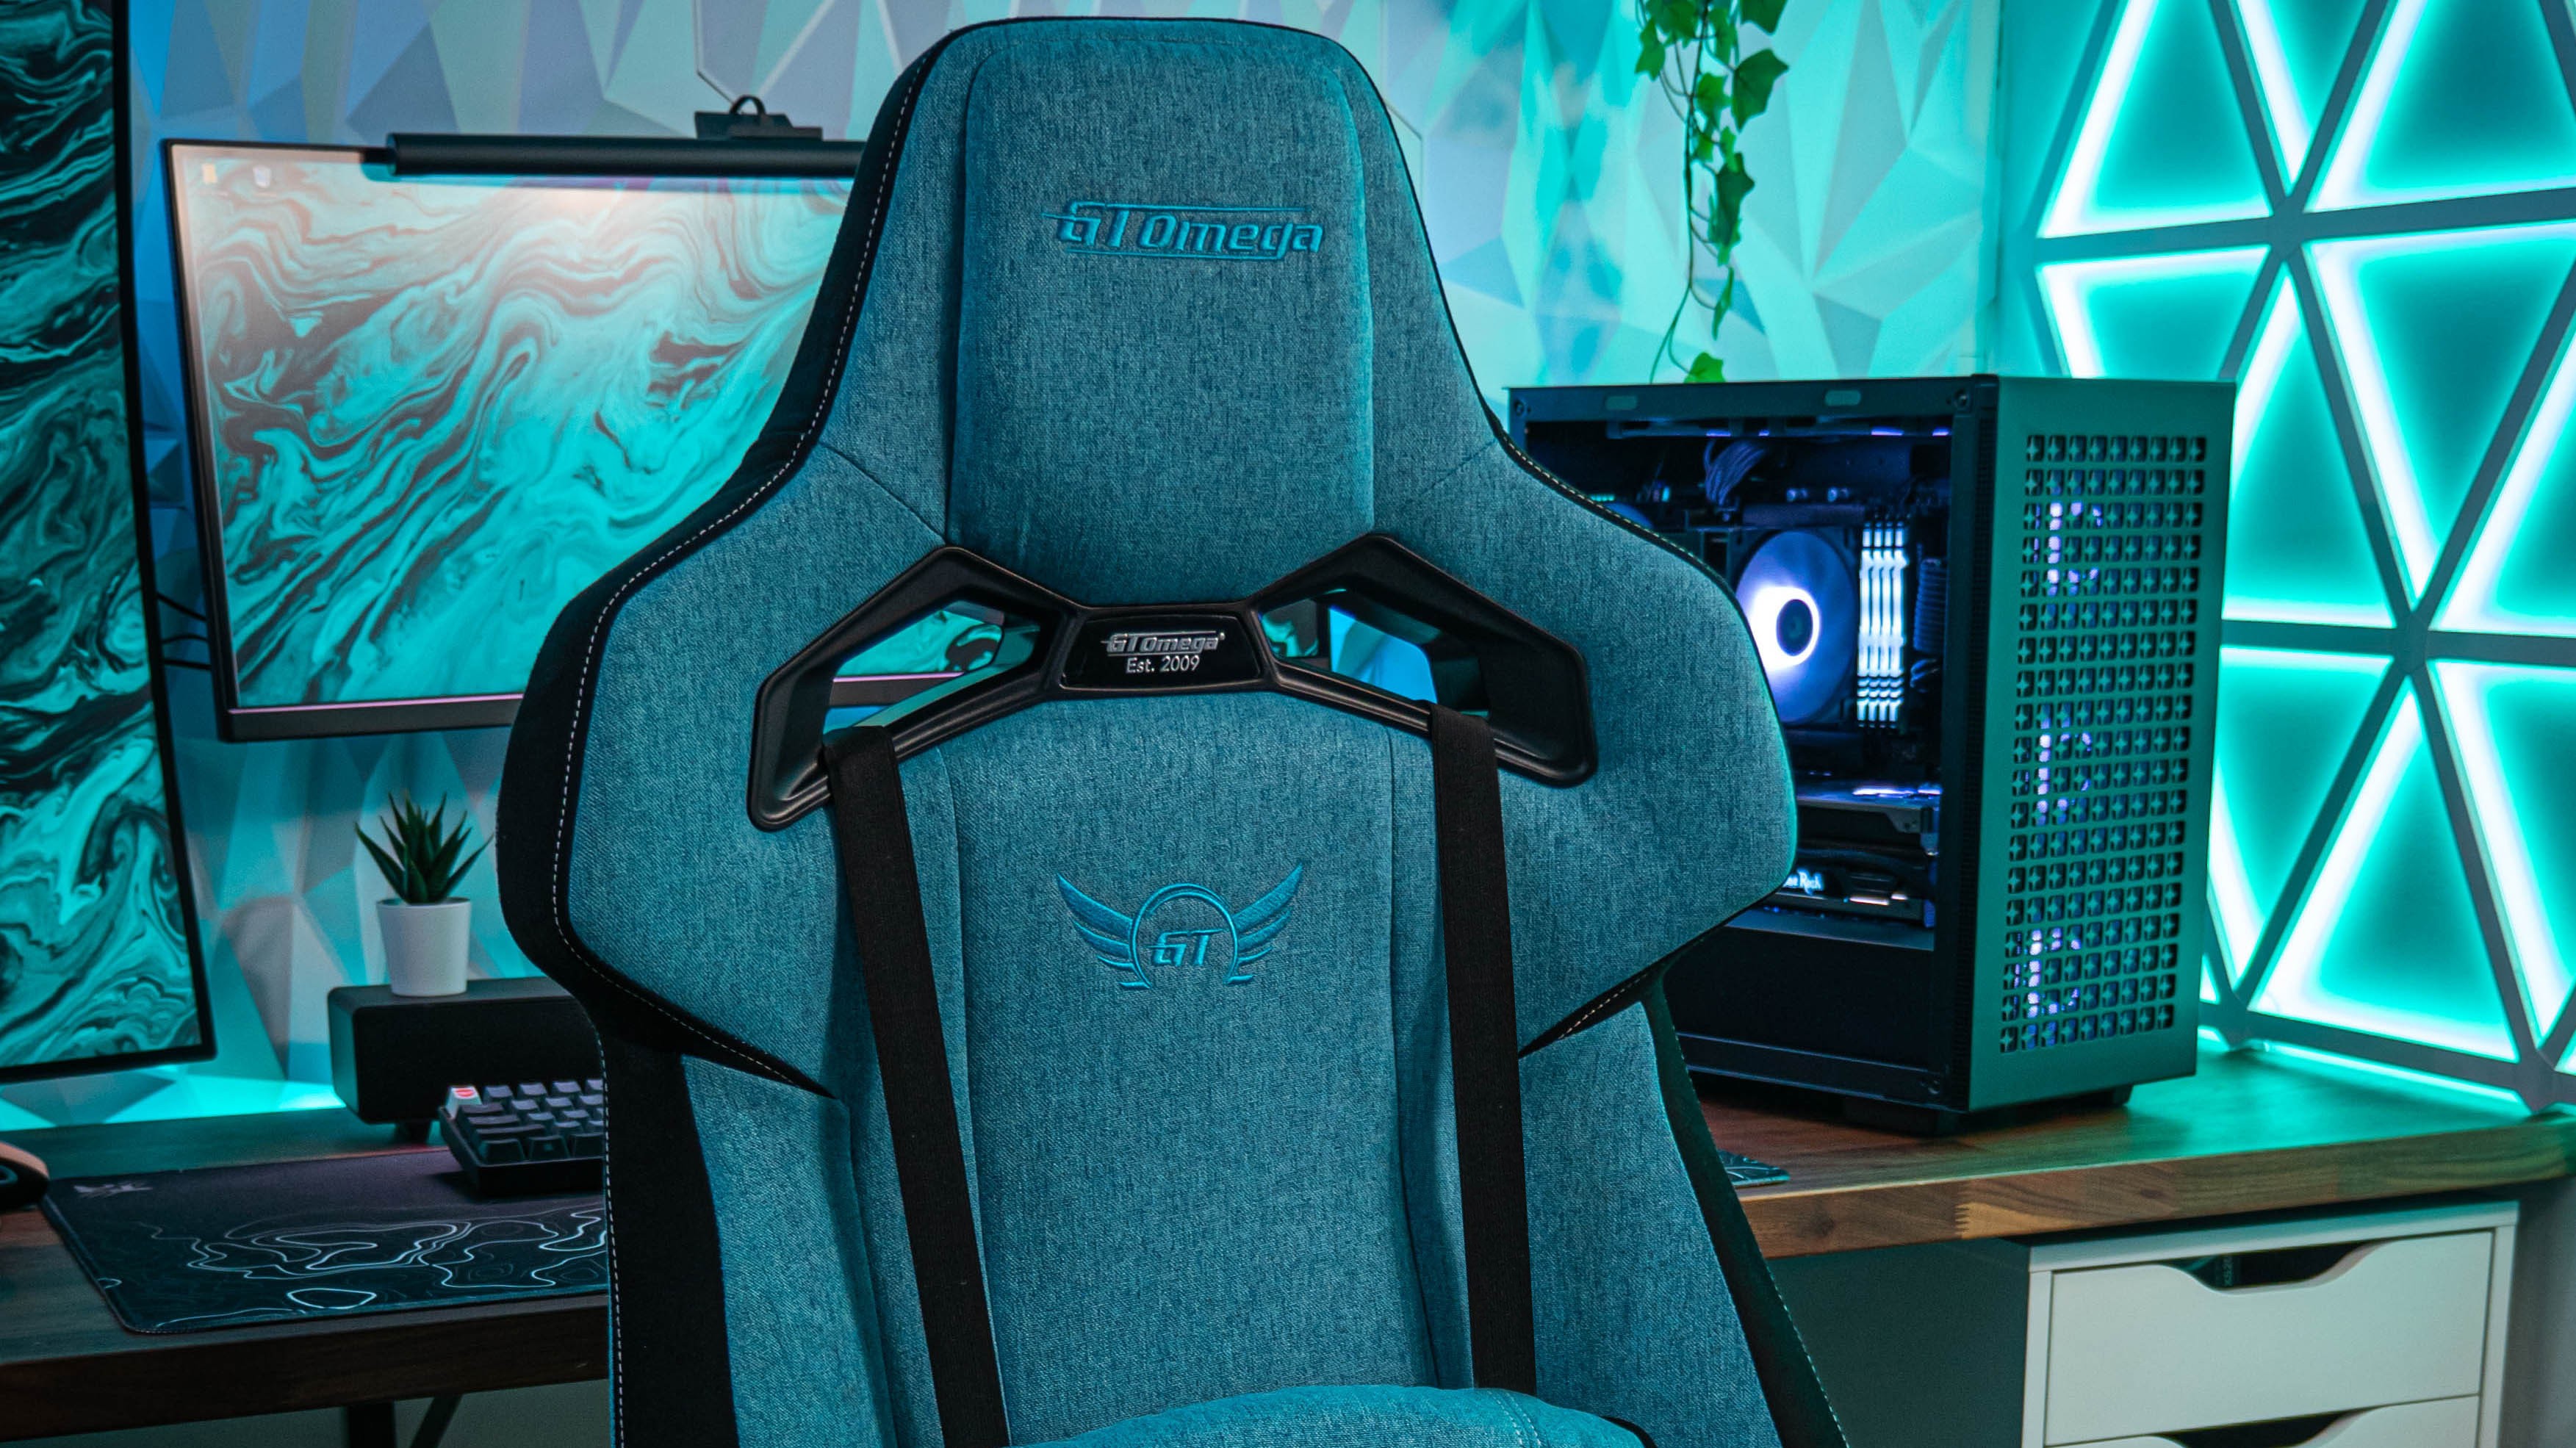  Looking for a modern update on the classic gaming chair design? GT Omega’s Zephyr would like a word 